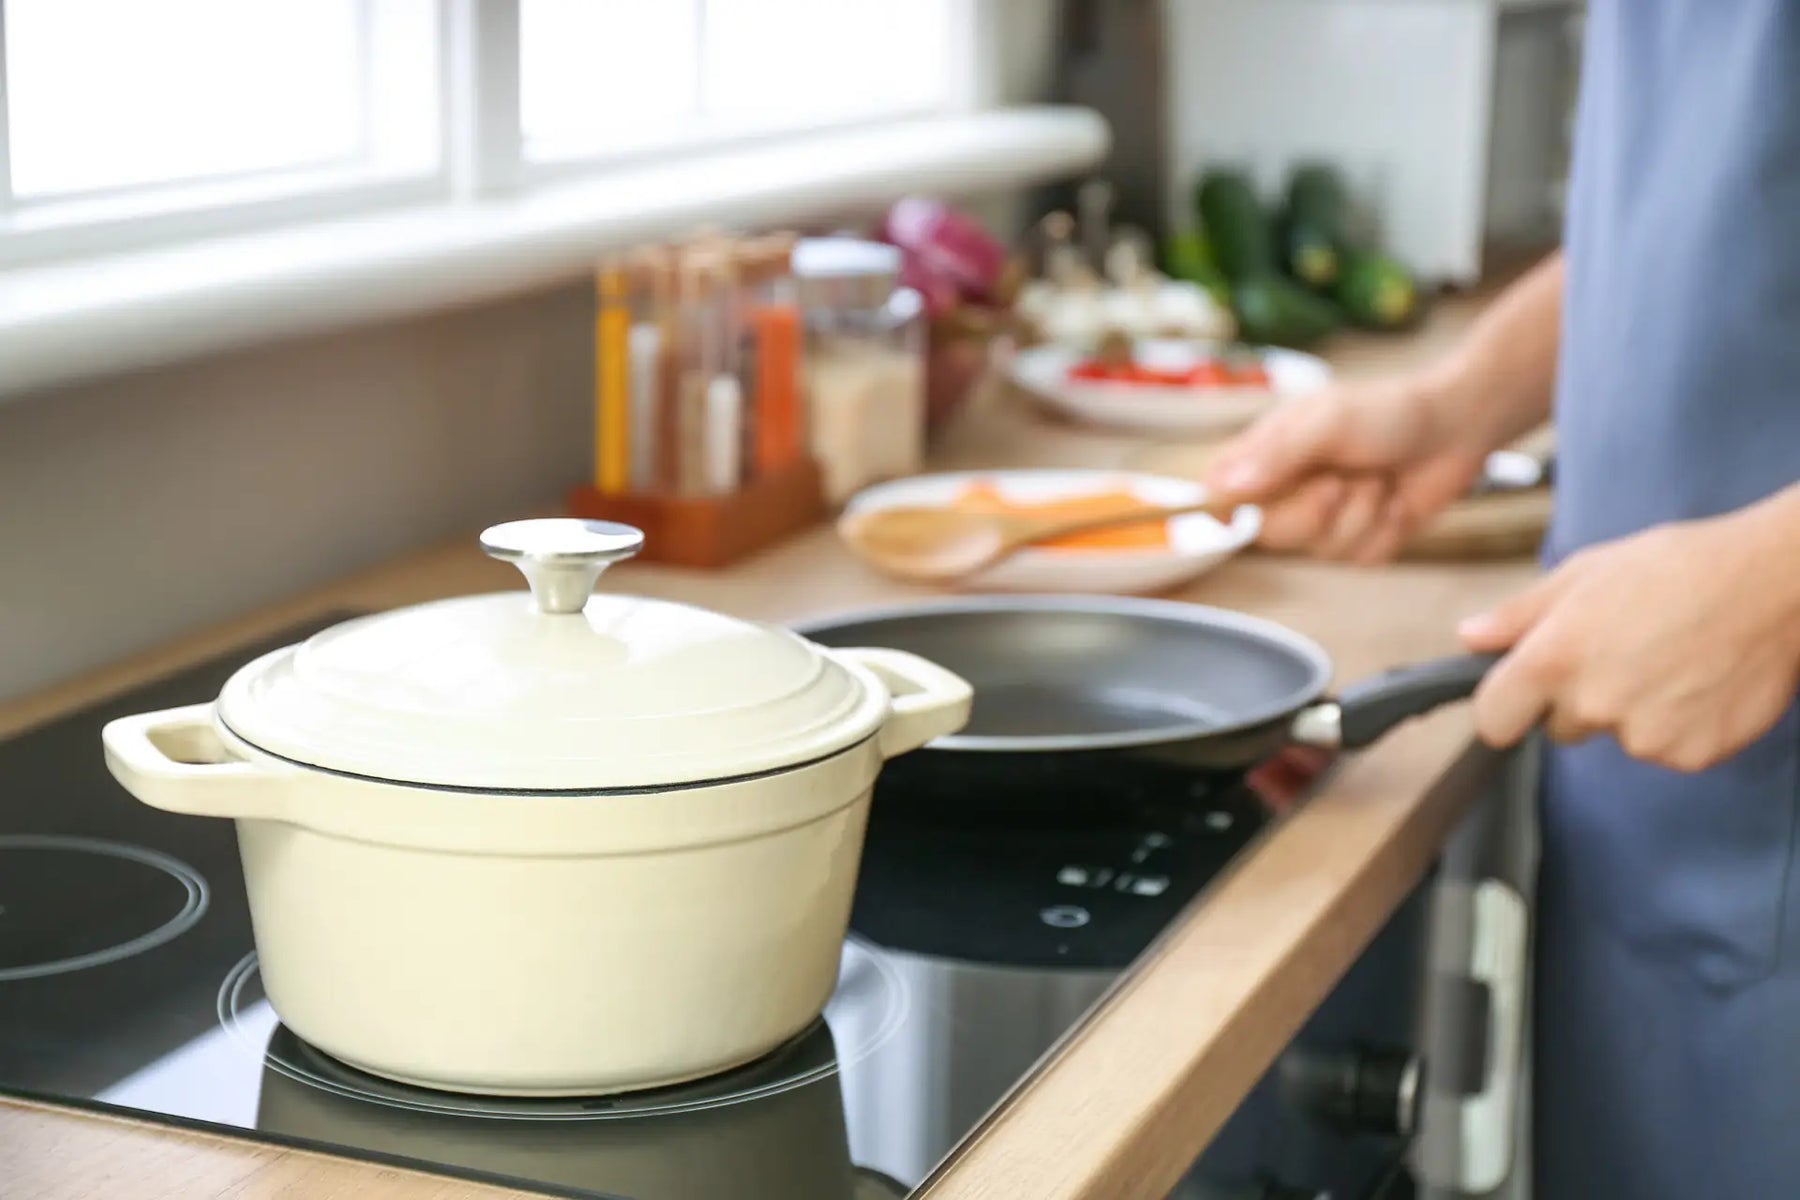 A home cook using two different types of pots and pans, including a sauté pan and Dutch oven